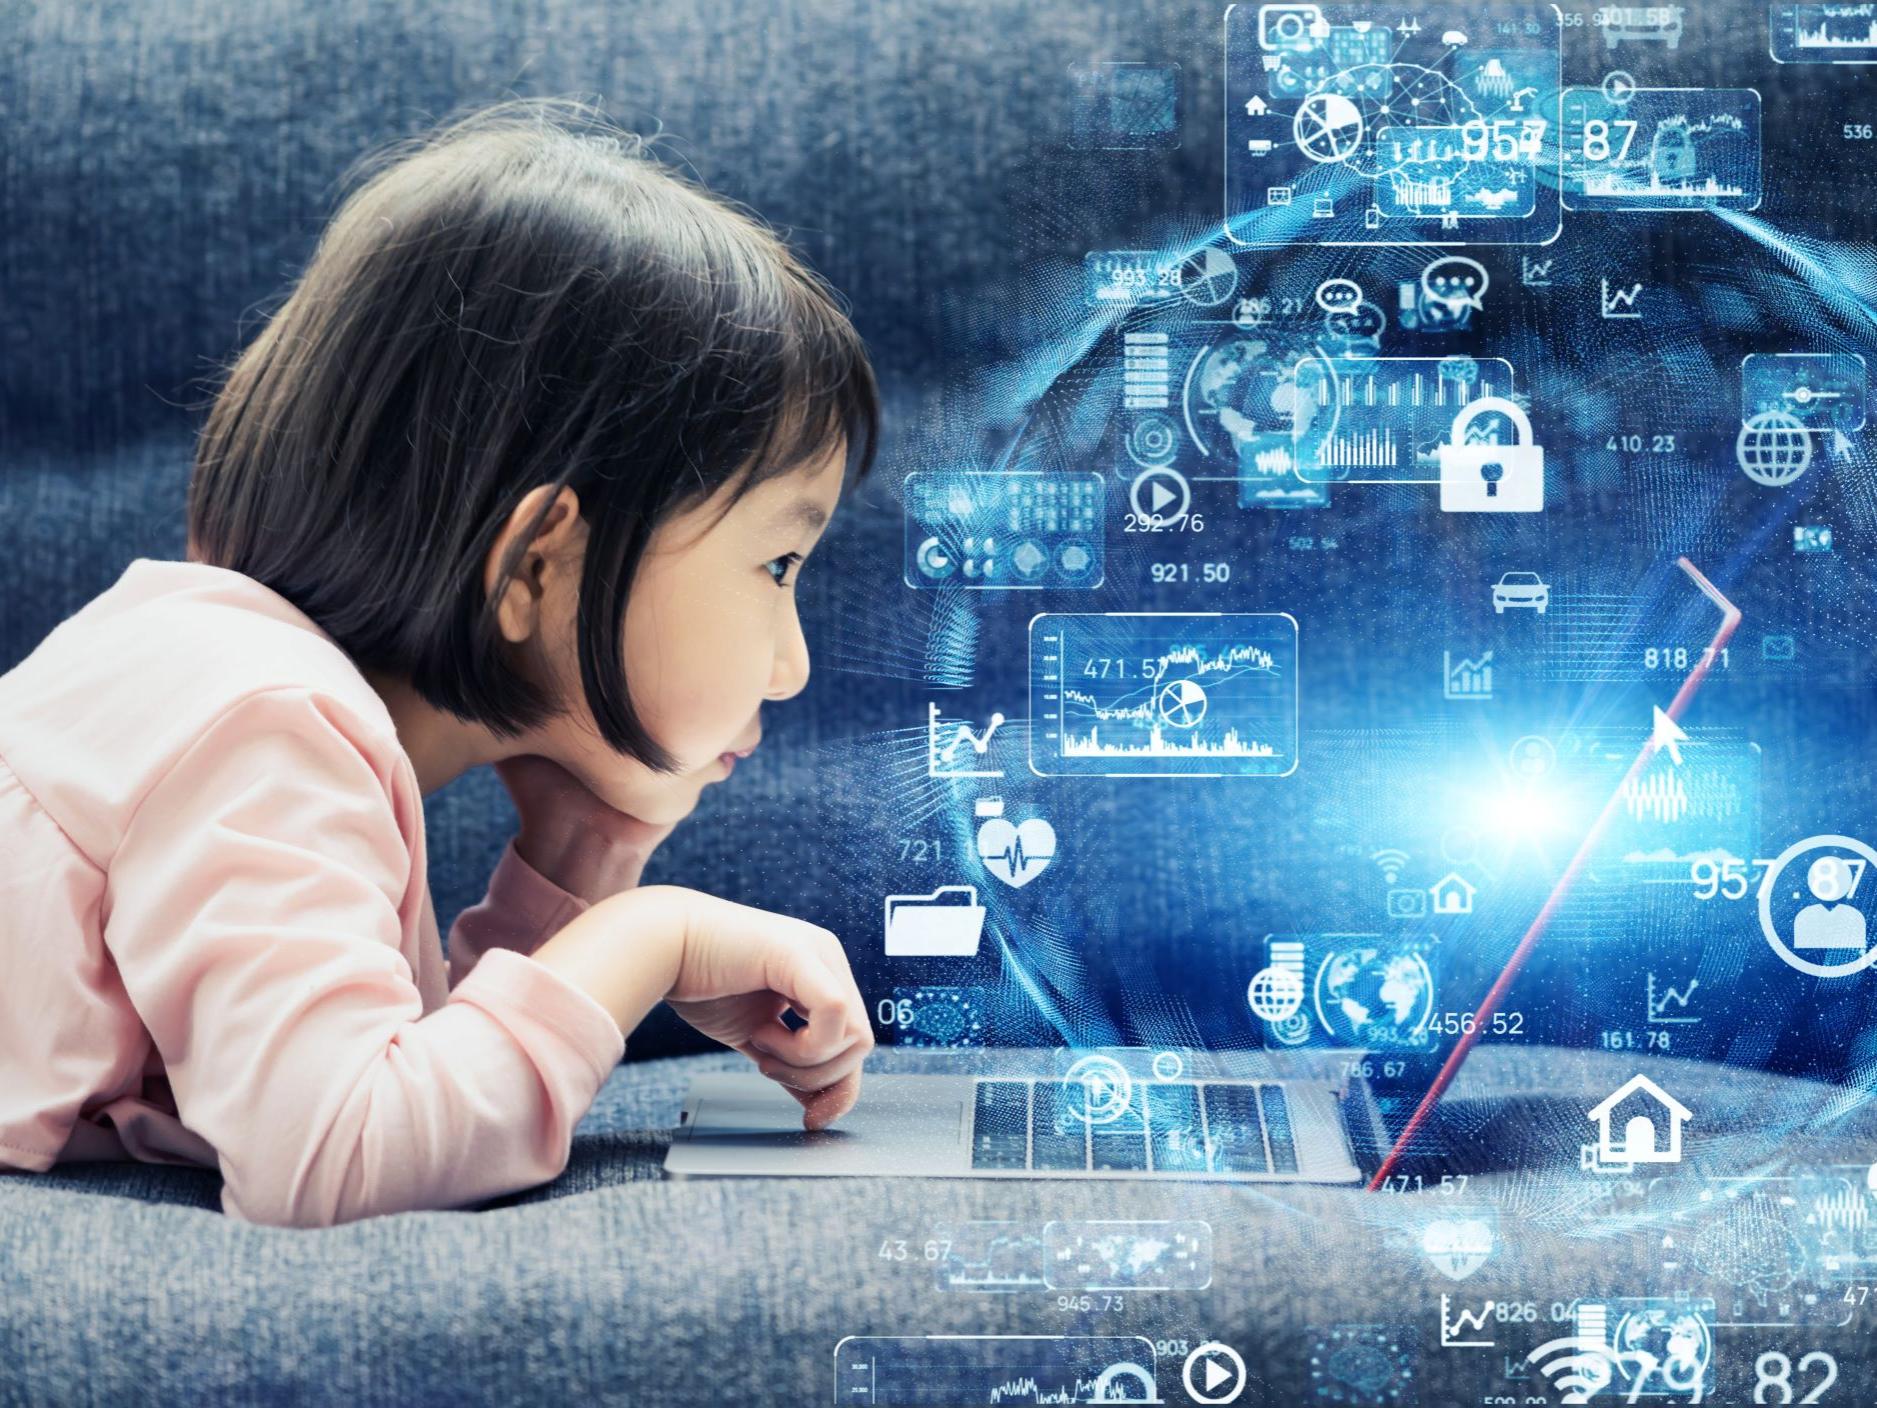 More engagement in tech design can improve children’s online privacy, security